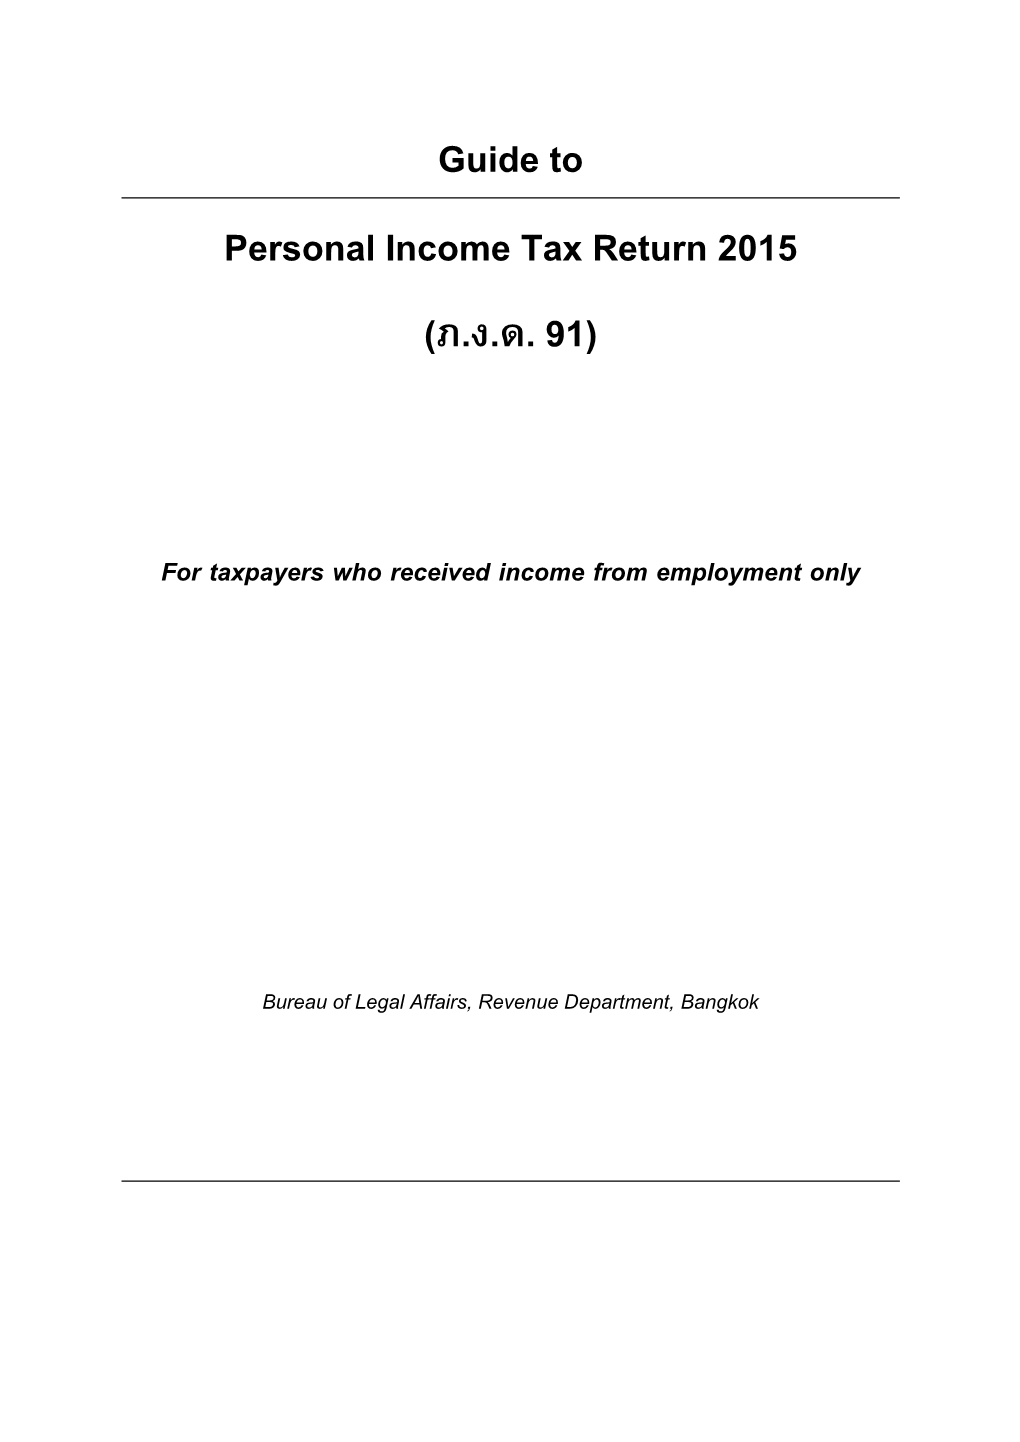 Guide to Personal Income Tax Return 2015 (ภ.ง.ด. 91)